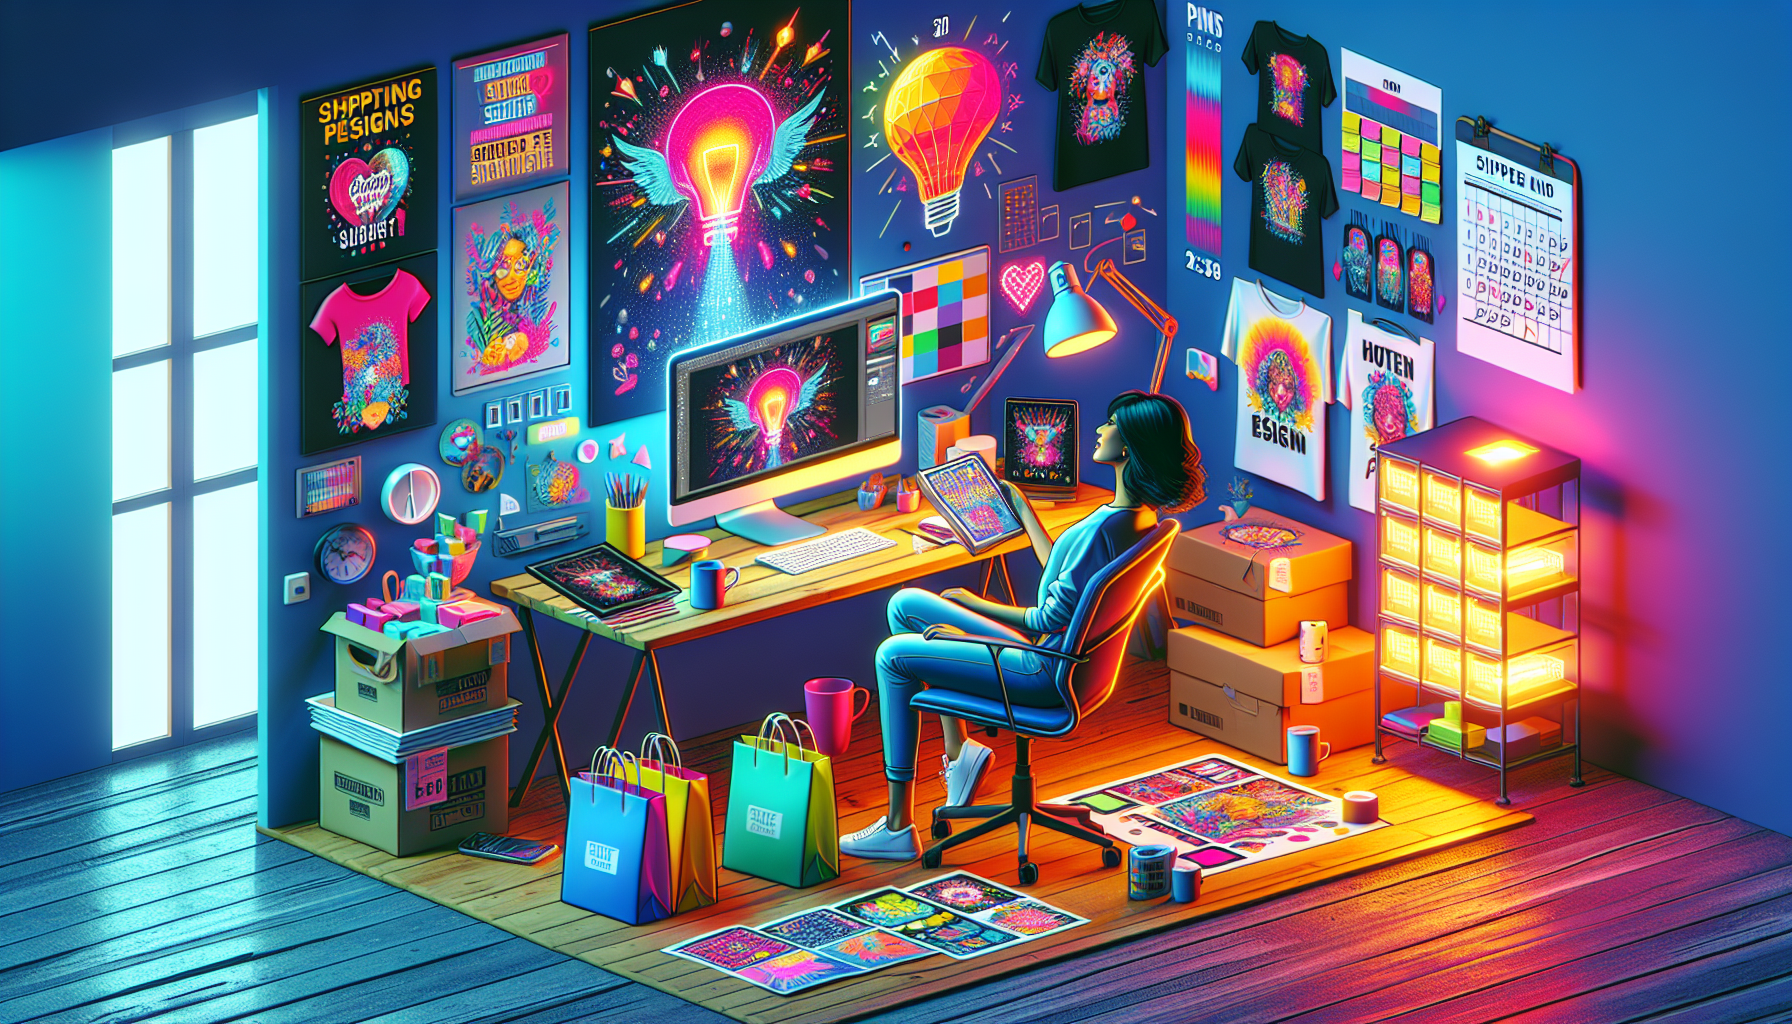 Create an illustration that depicts a bustling home office with a creative workspace. Include a desktop computer displaying design software, vibrant custom T-shirt designs, mugs, and tote bags laid ou